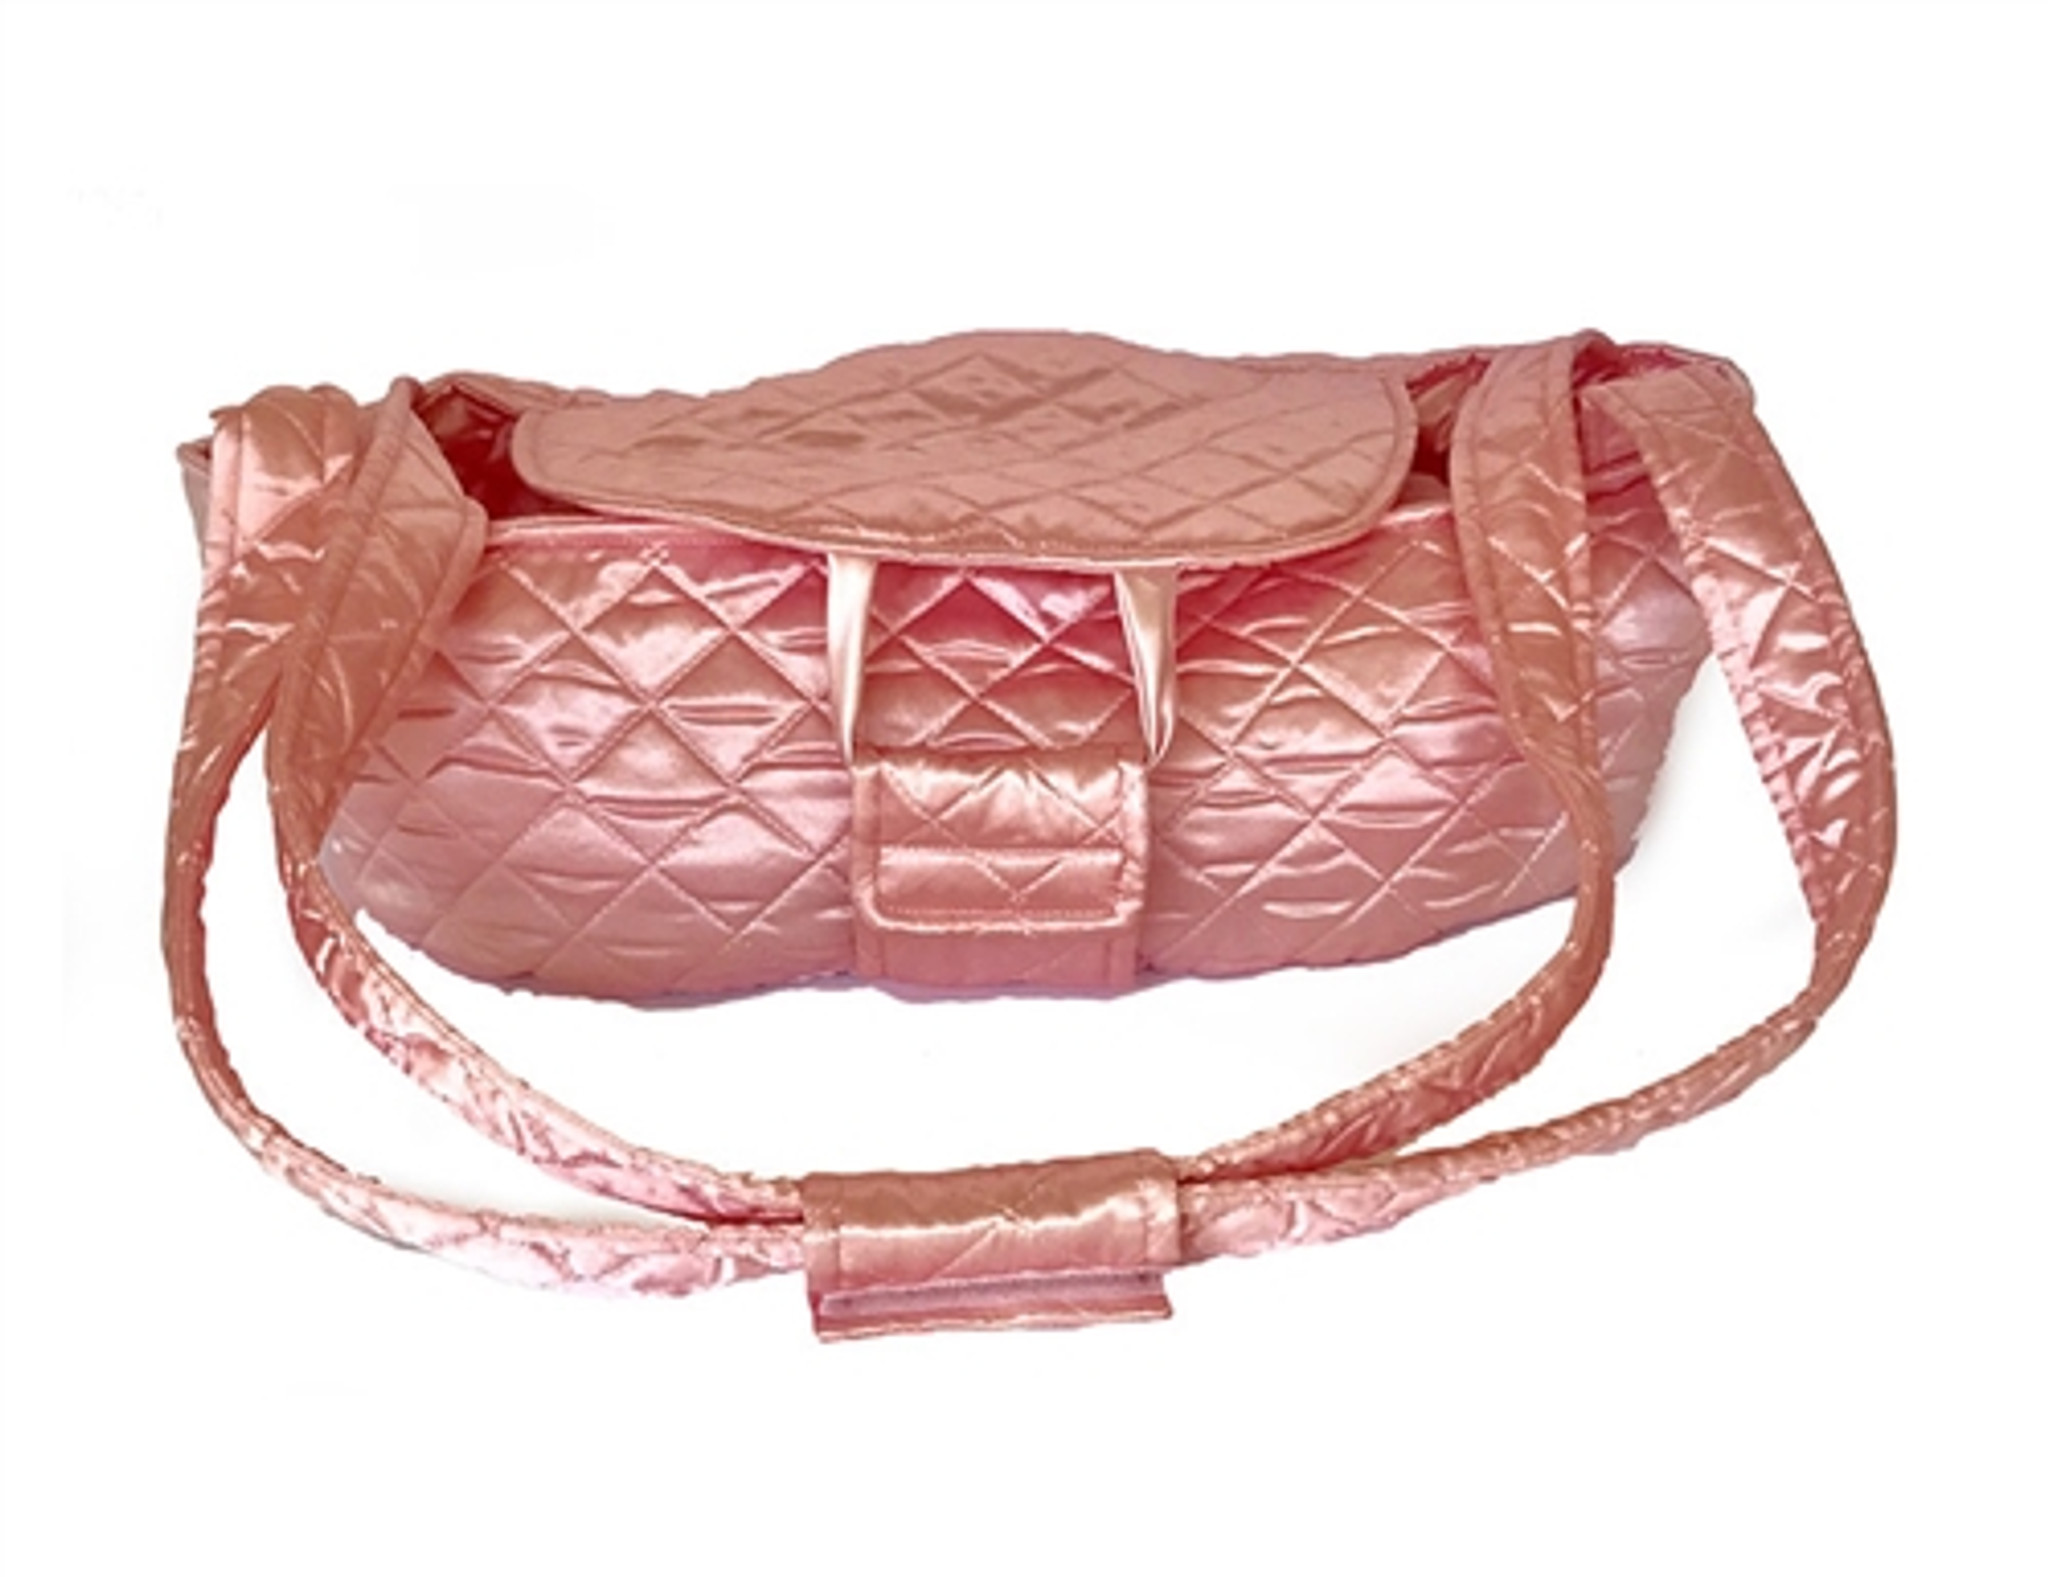 Ivory Quilted Luxe JL Duffel Bag with Snake